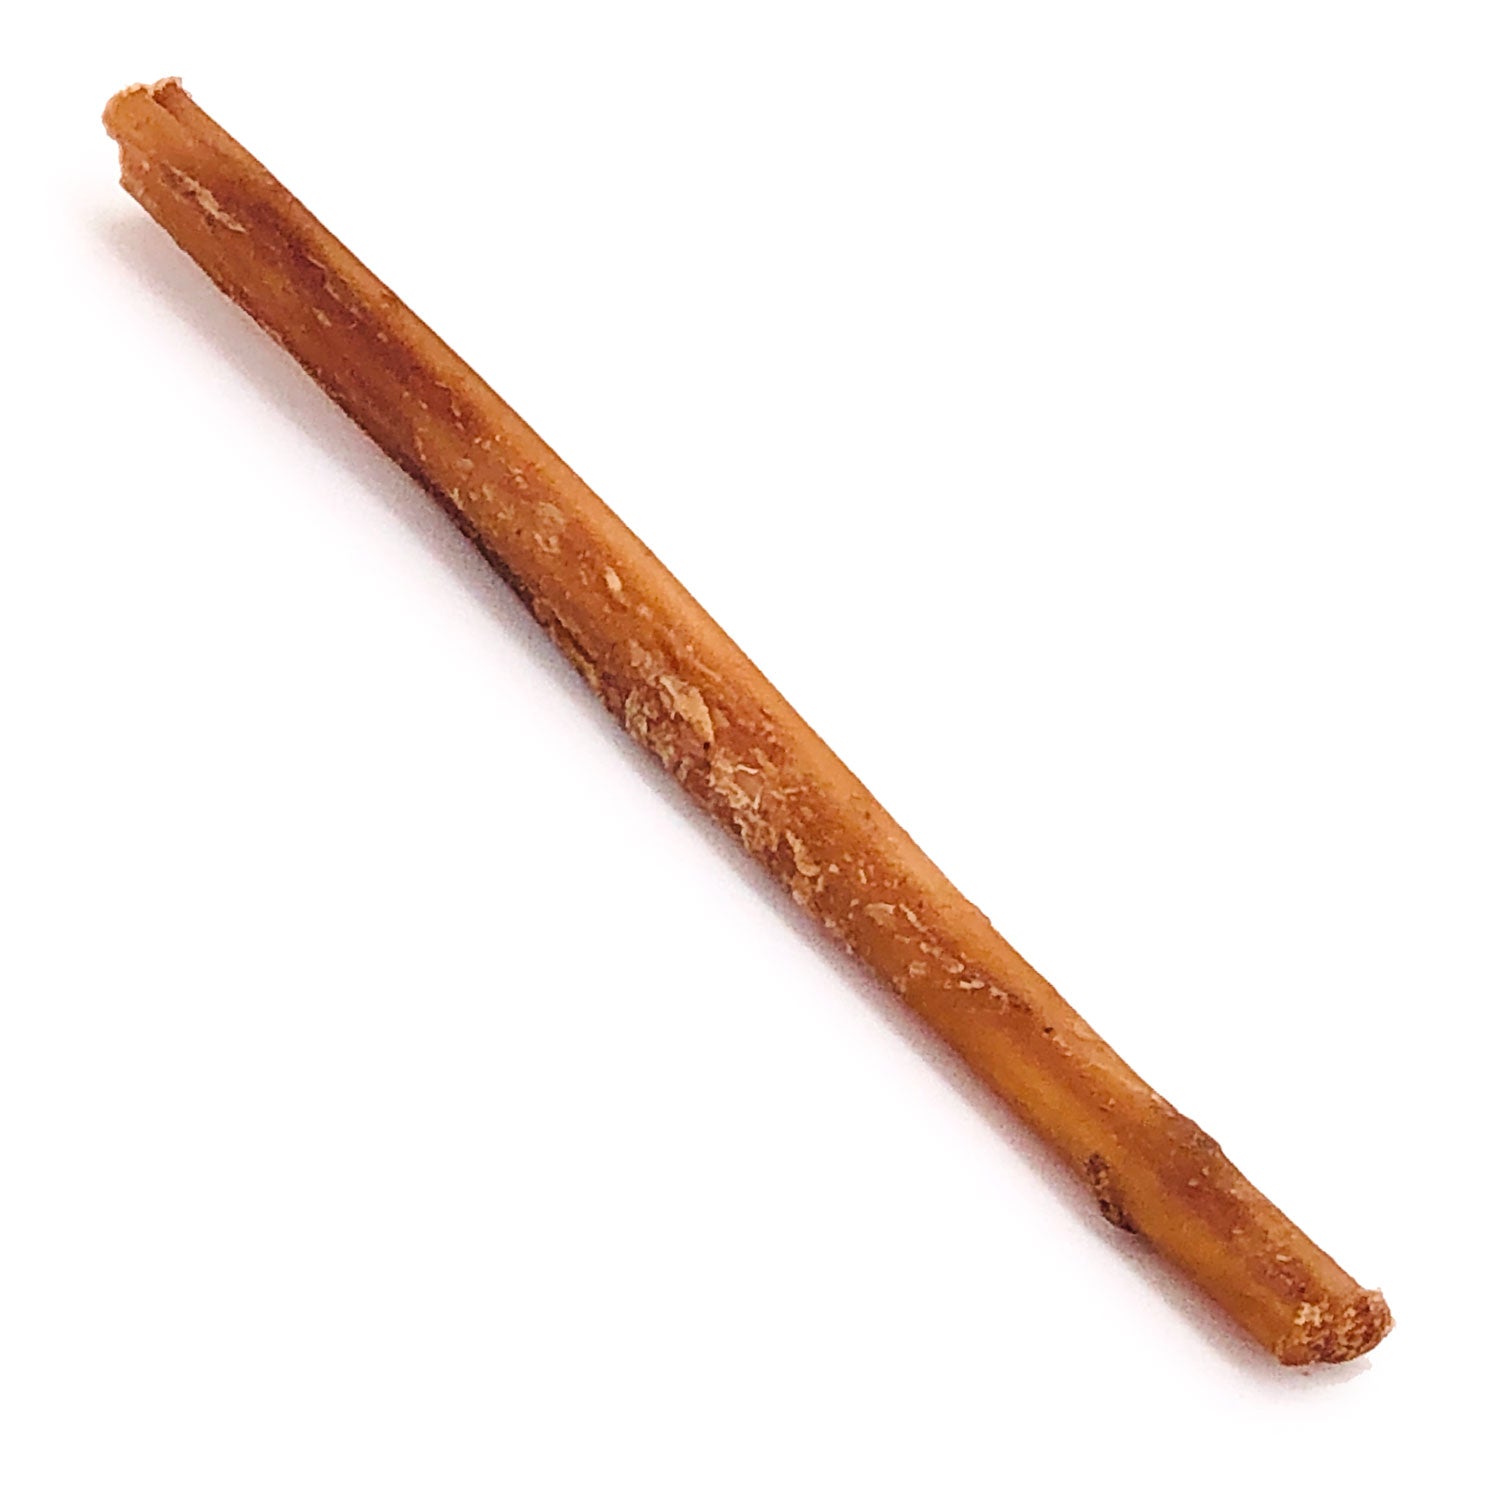 ValueBull Bully Sticks for Small Dogs, Extra Thin 4-6", Varied Shapes, 200 ct